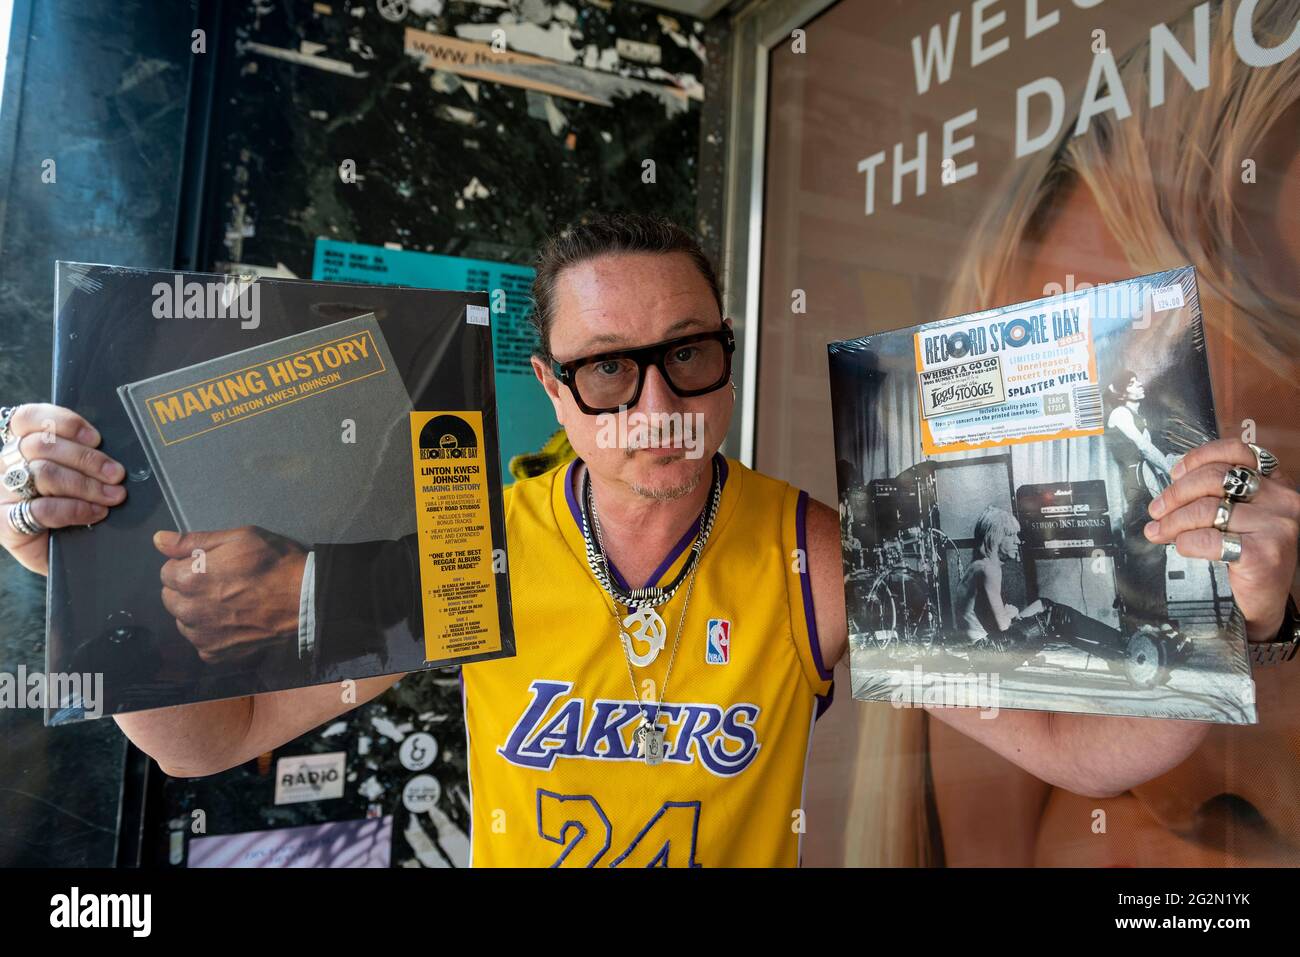 London Uk 12 June 21 Ritchie Beacham Paterson Music Fan And Poet Shows Off His Purchases Outside Phonica Records In Soho On Record Store Day Where Independent Record Shops Worldwide Celebrate Music Including